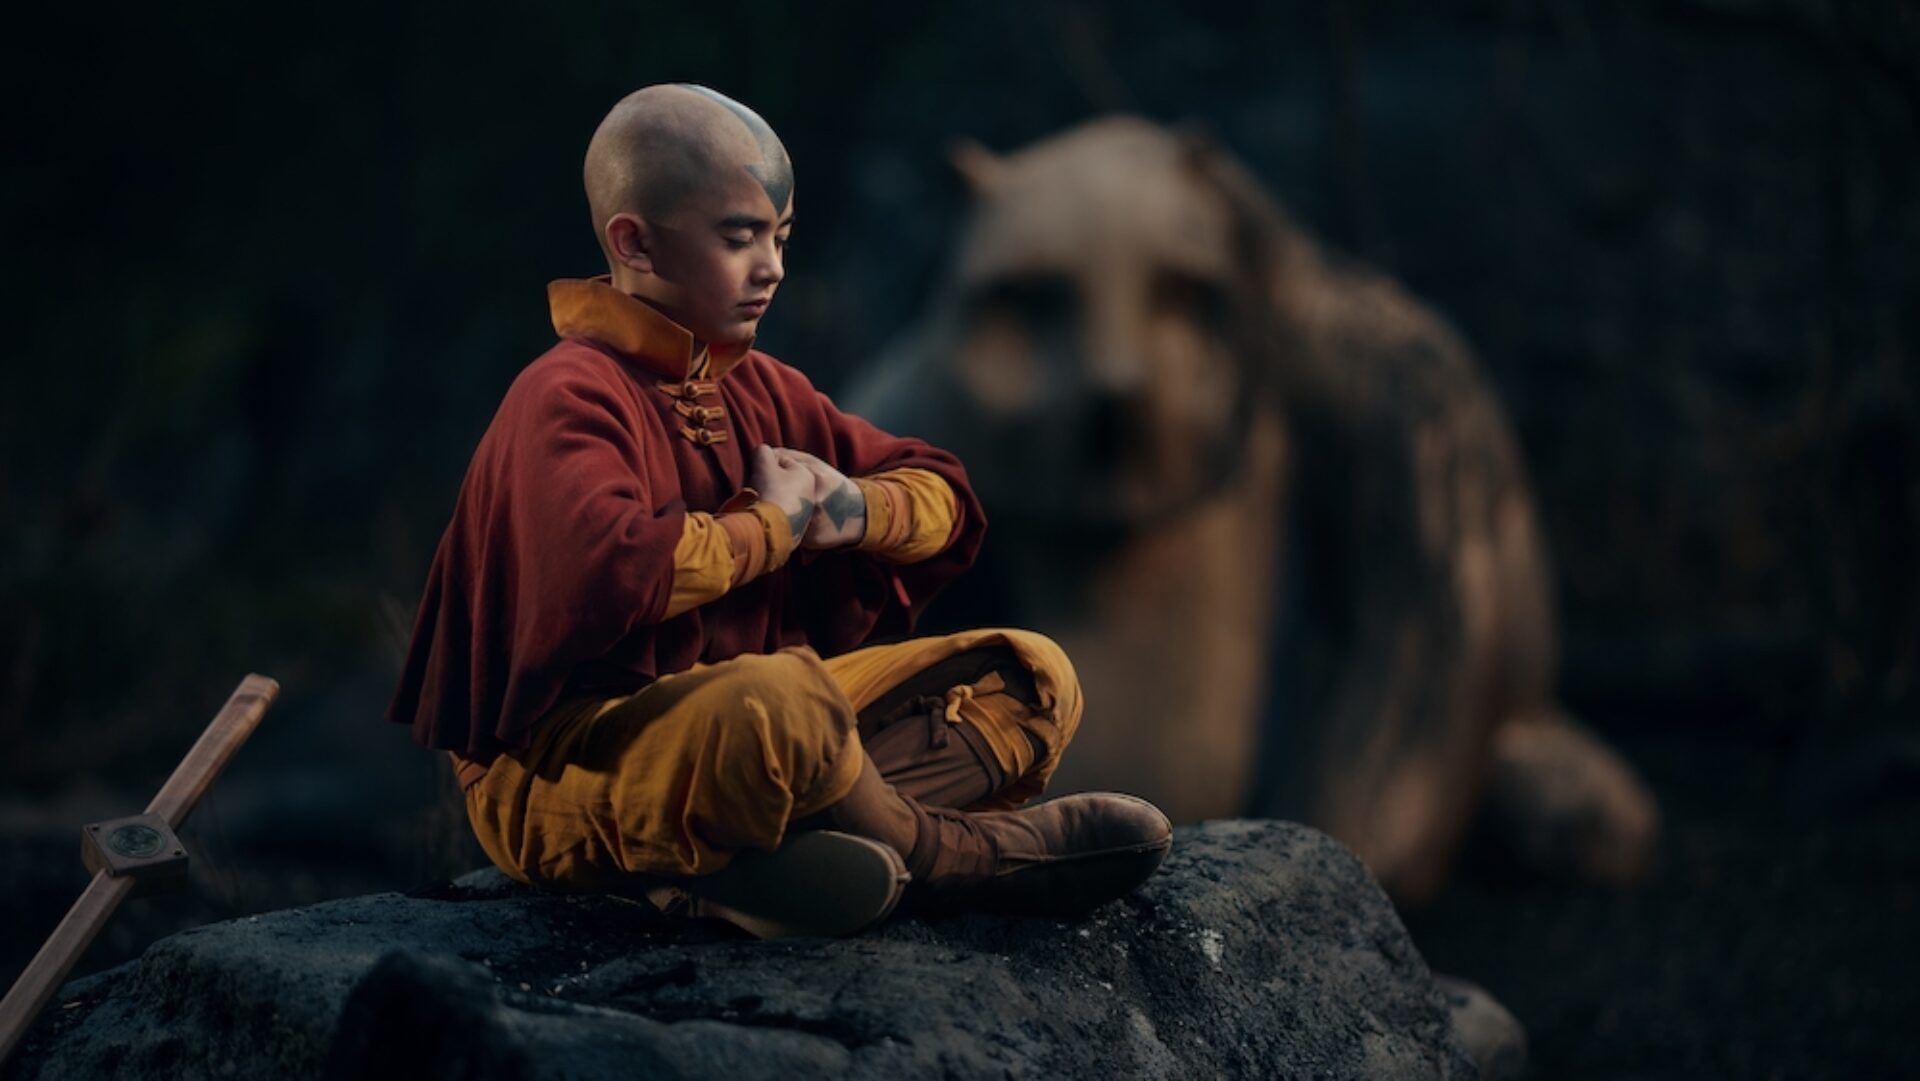 Netflix unveiled the official teaser trailer for their exciting live-action adaptation of Avatar: The Last Airbender. The show premiers on February 22.